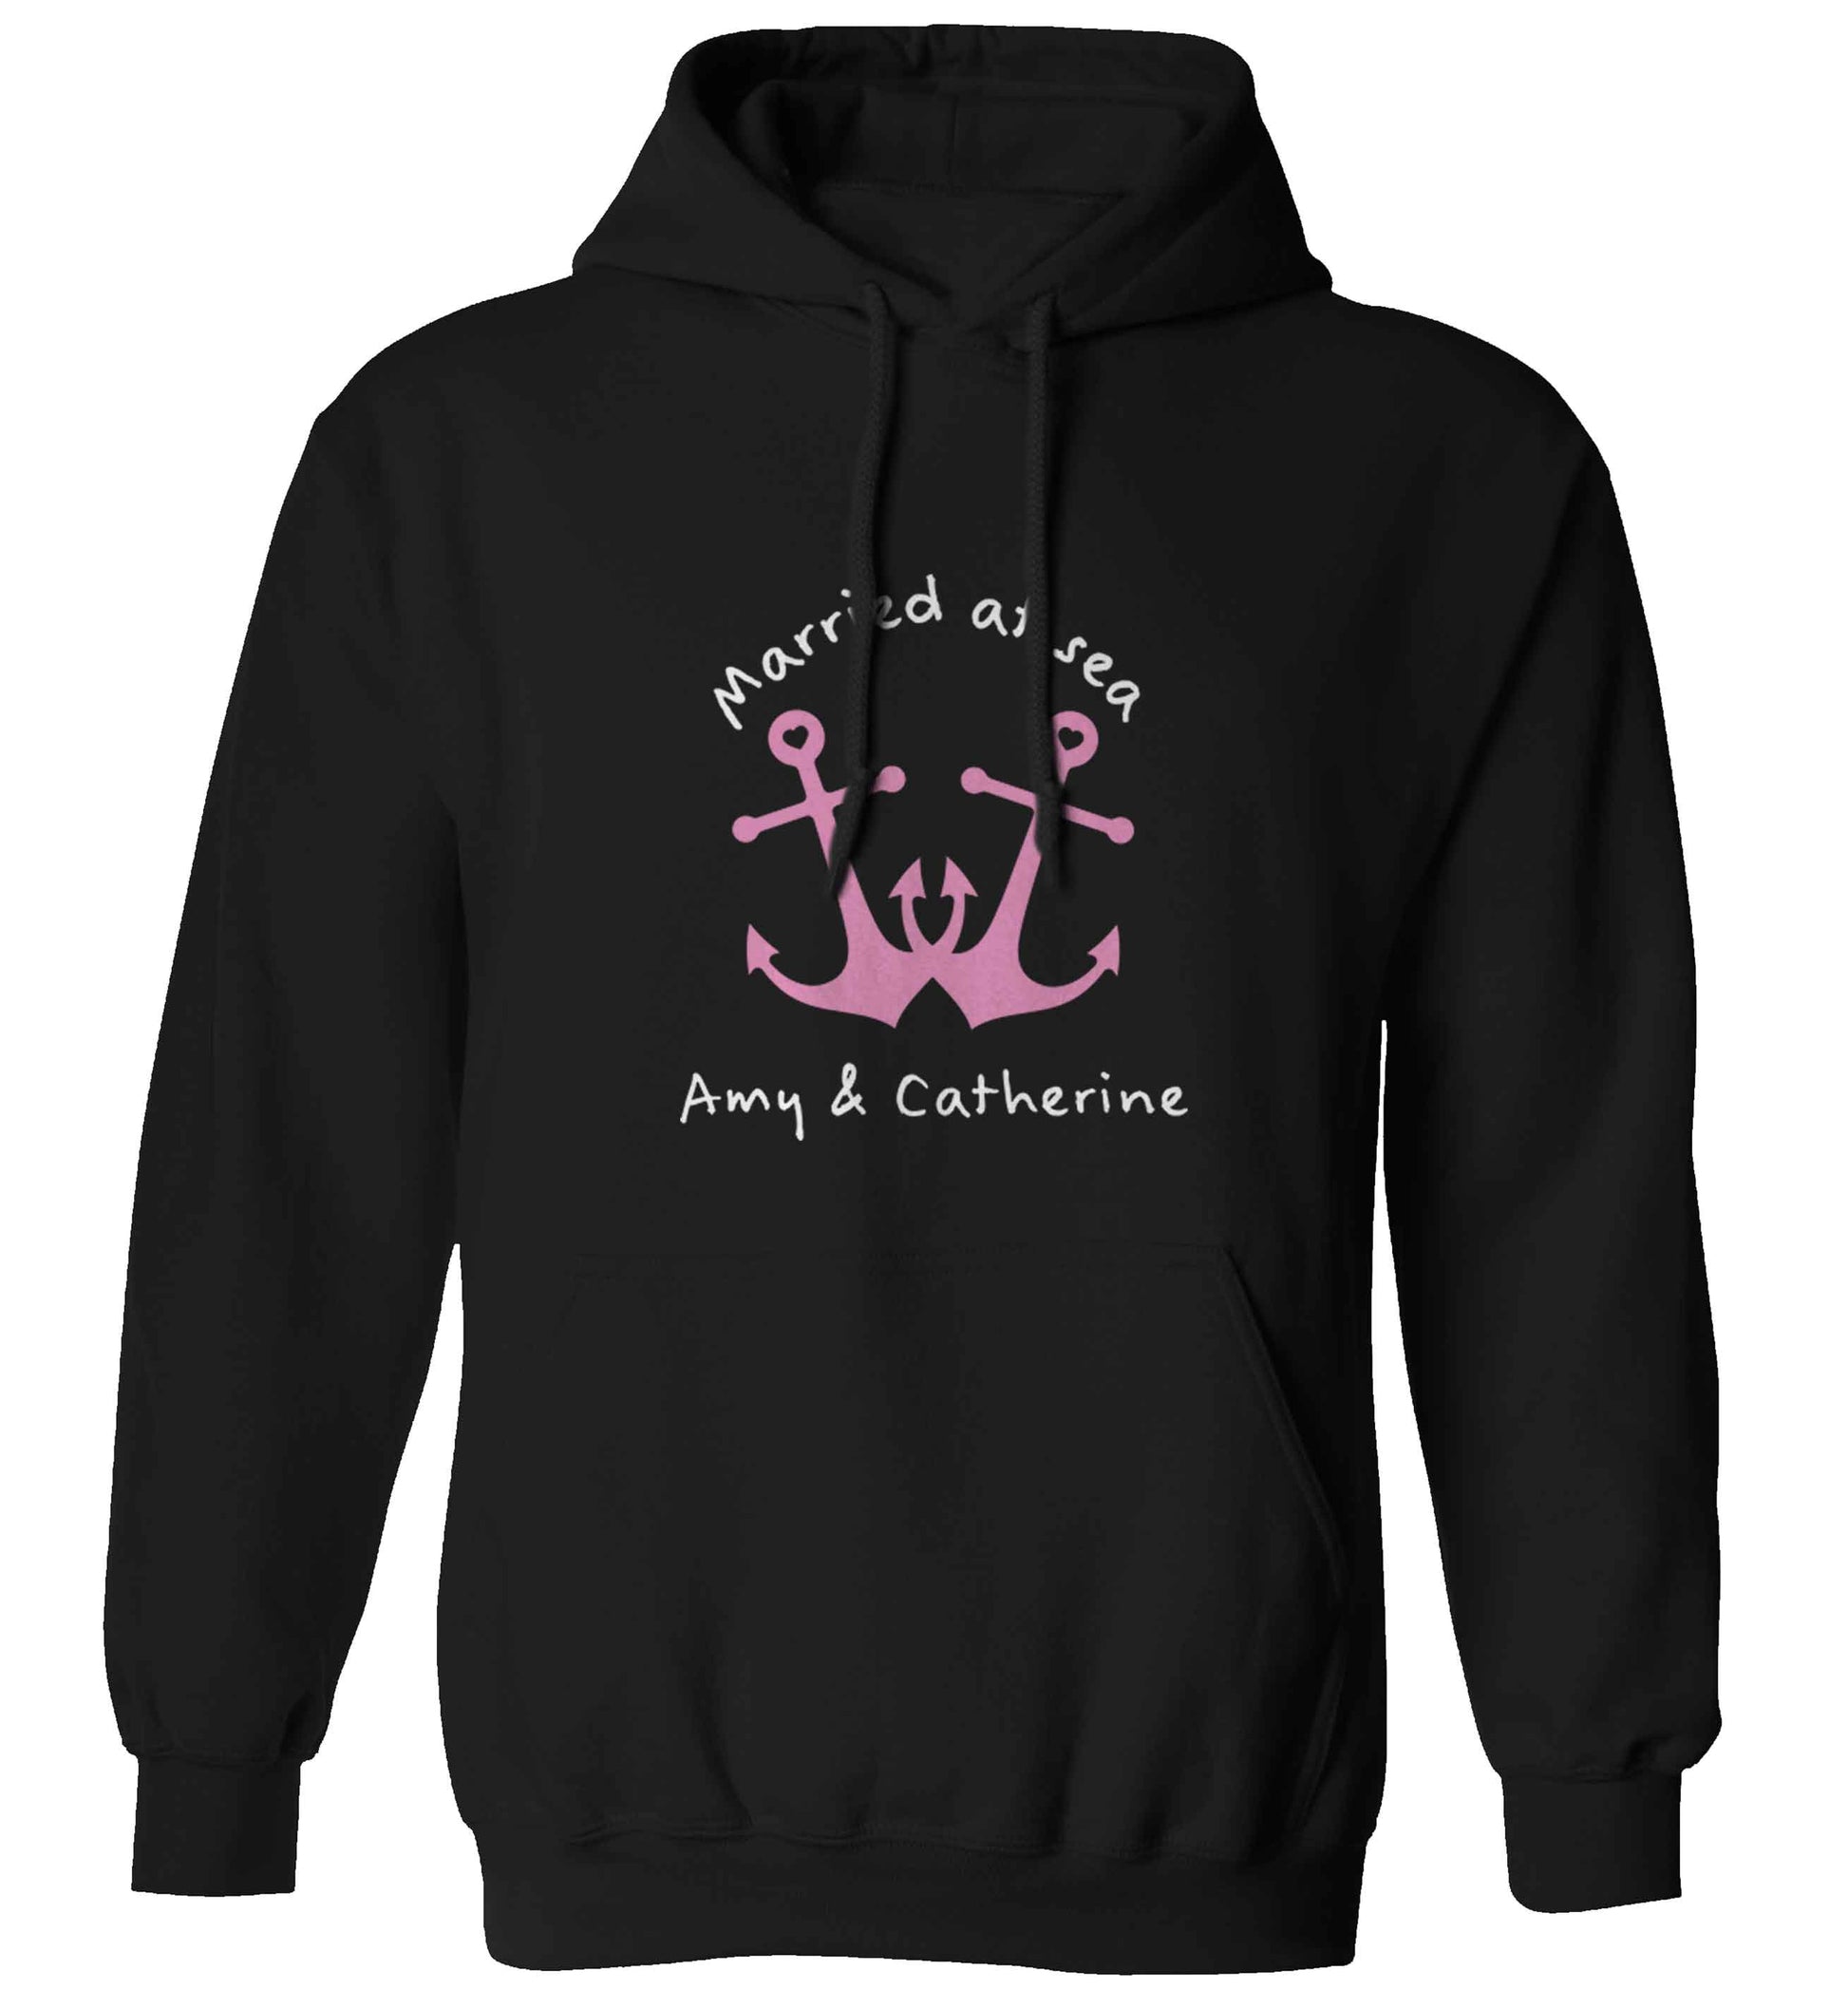 Married at sea pink anchors adults unisex black hoodie 2XL